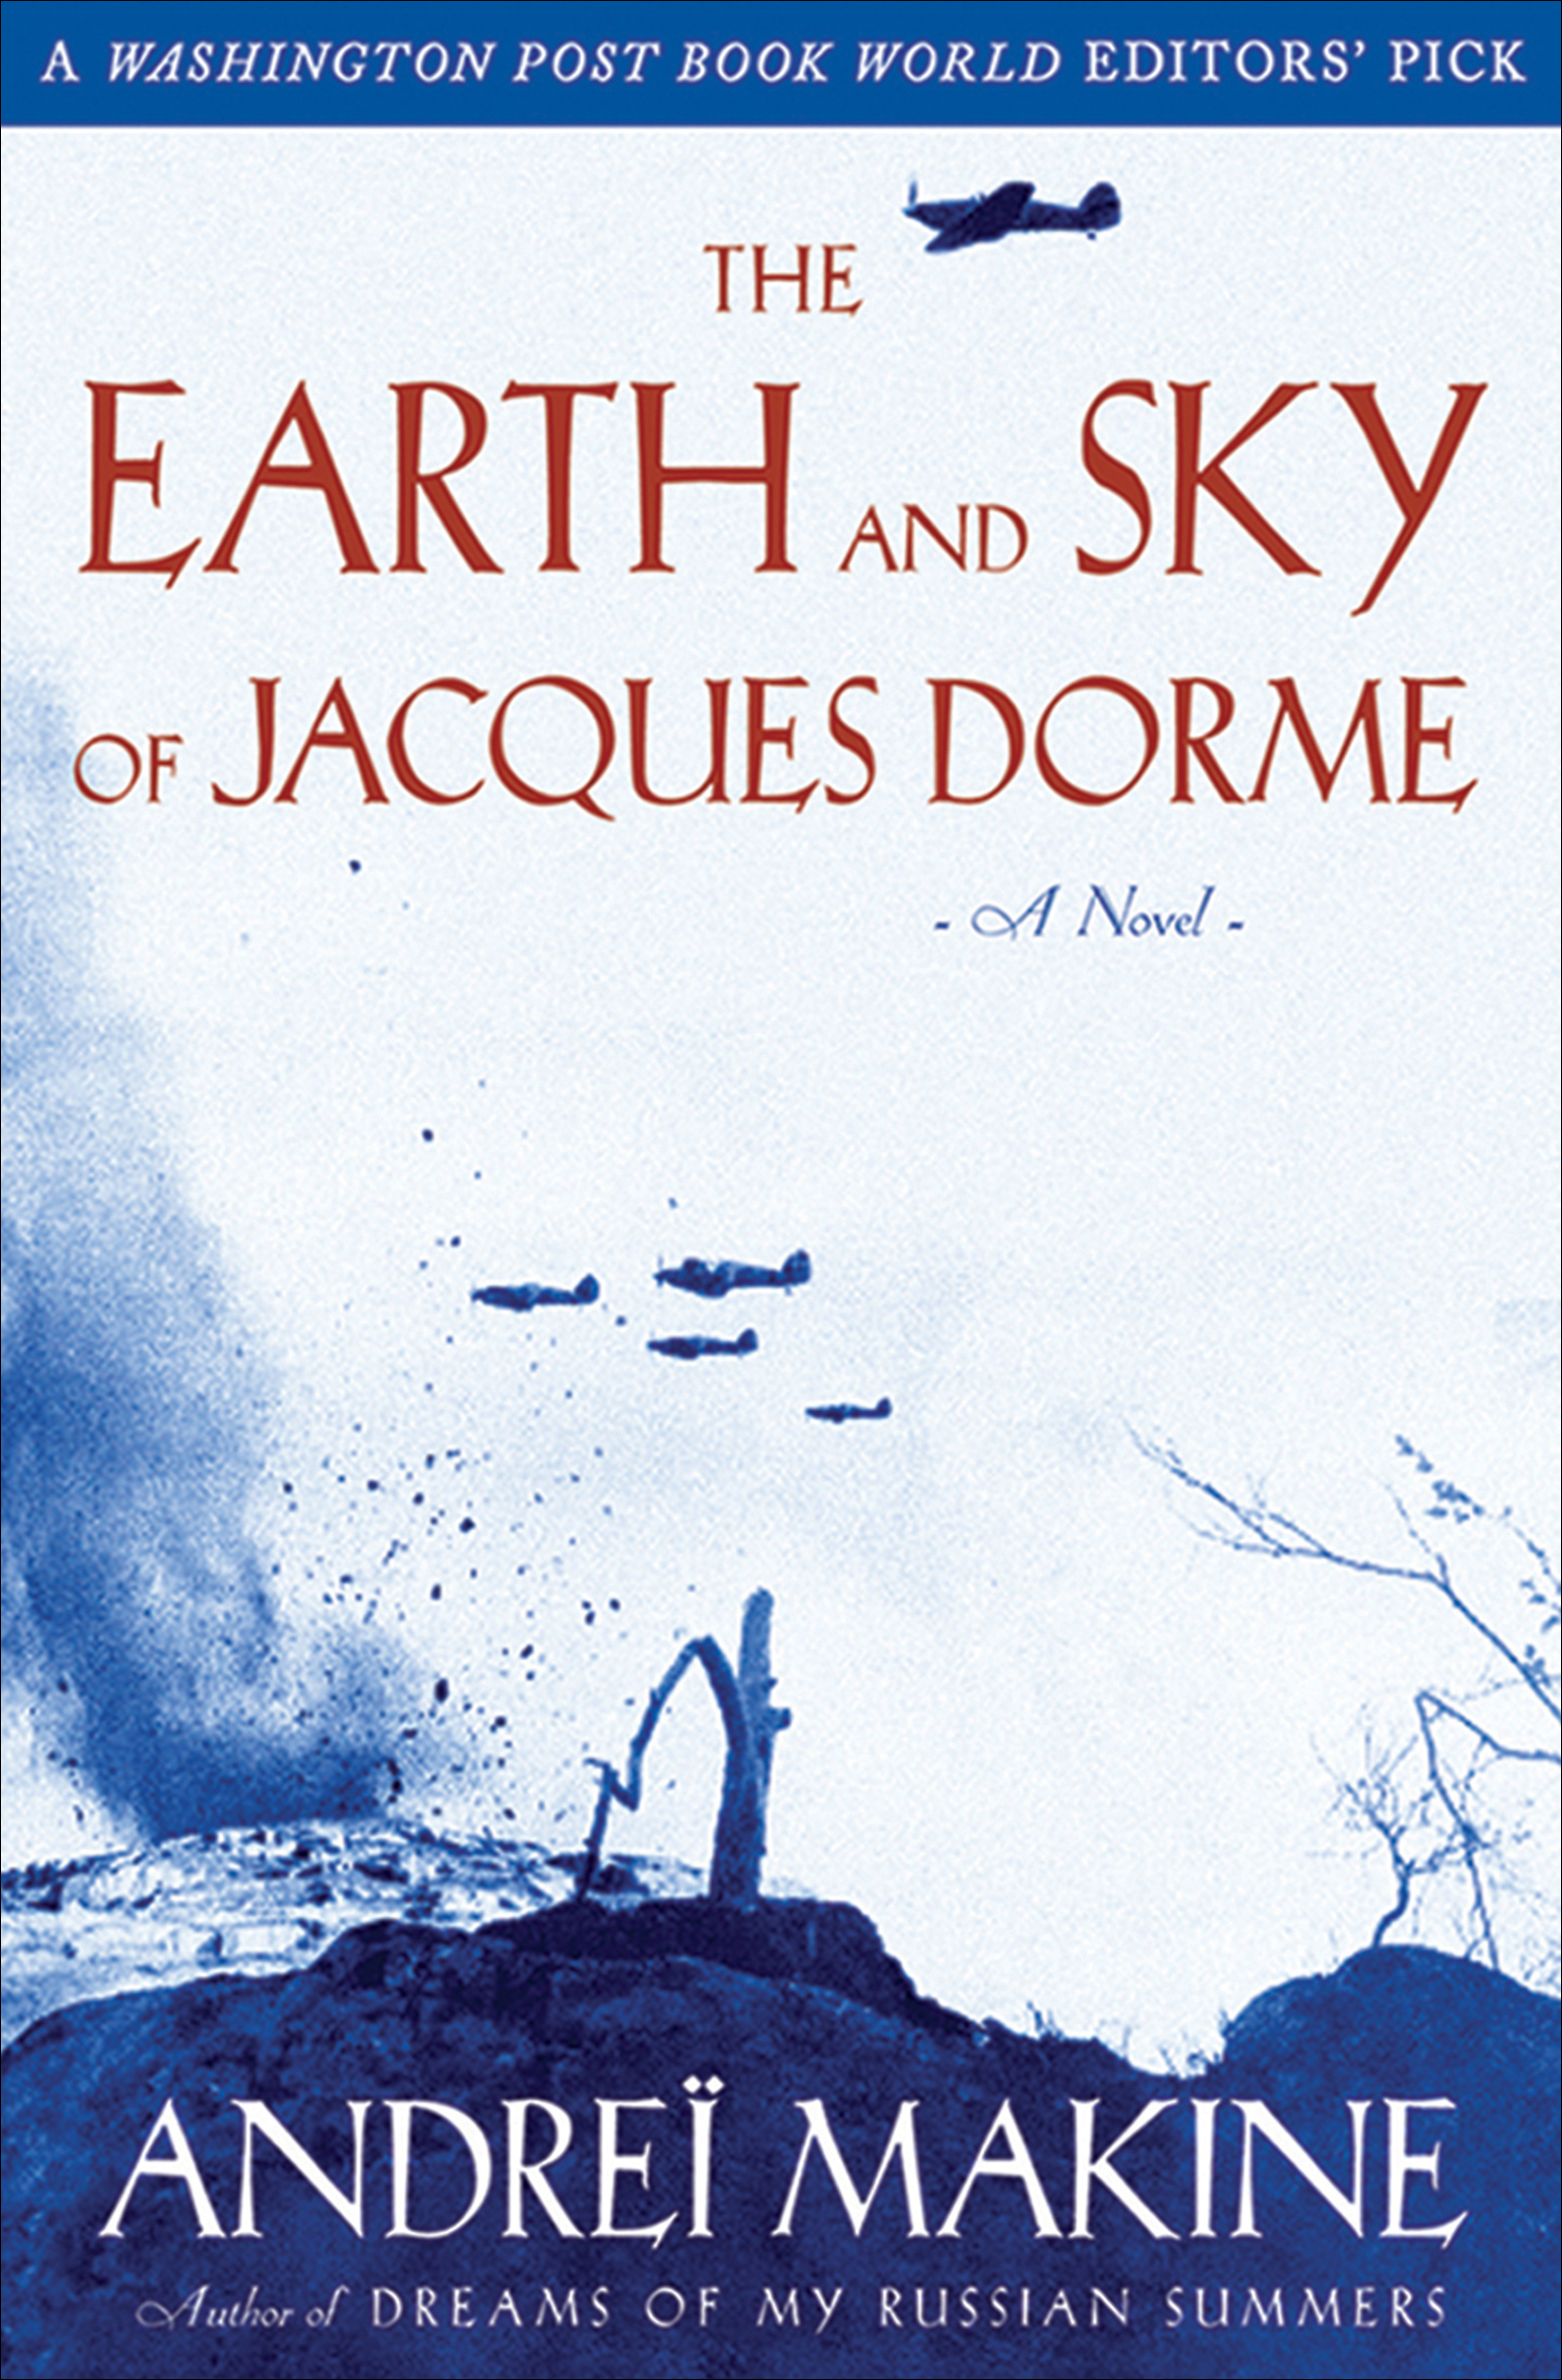 The Earth and Sky of Jacques Dorme - 15-24.99